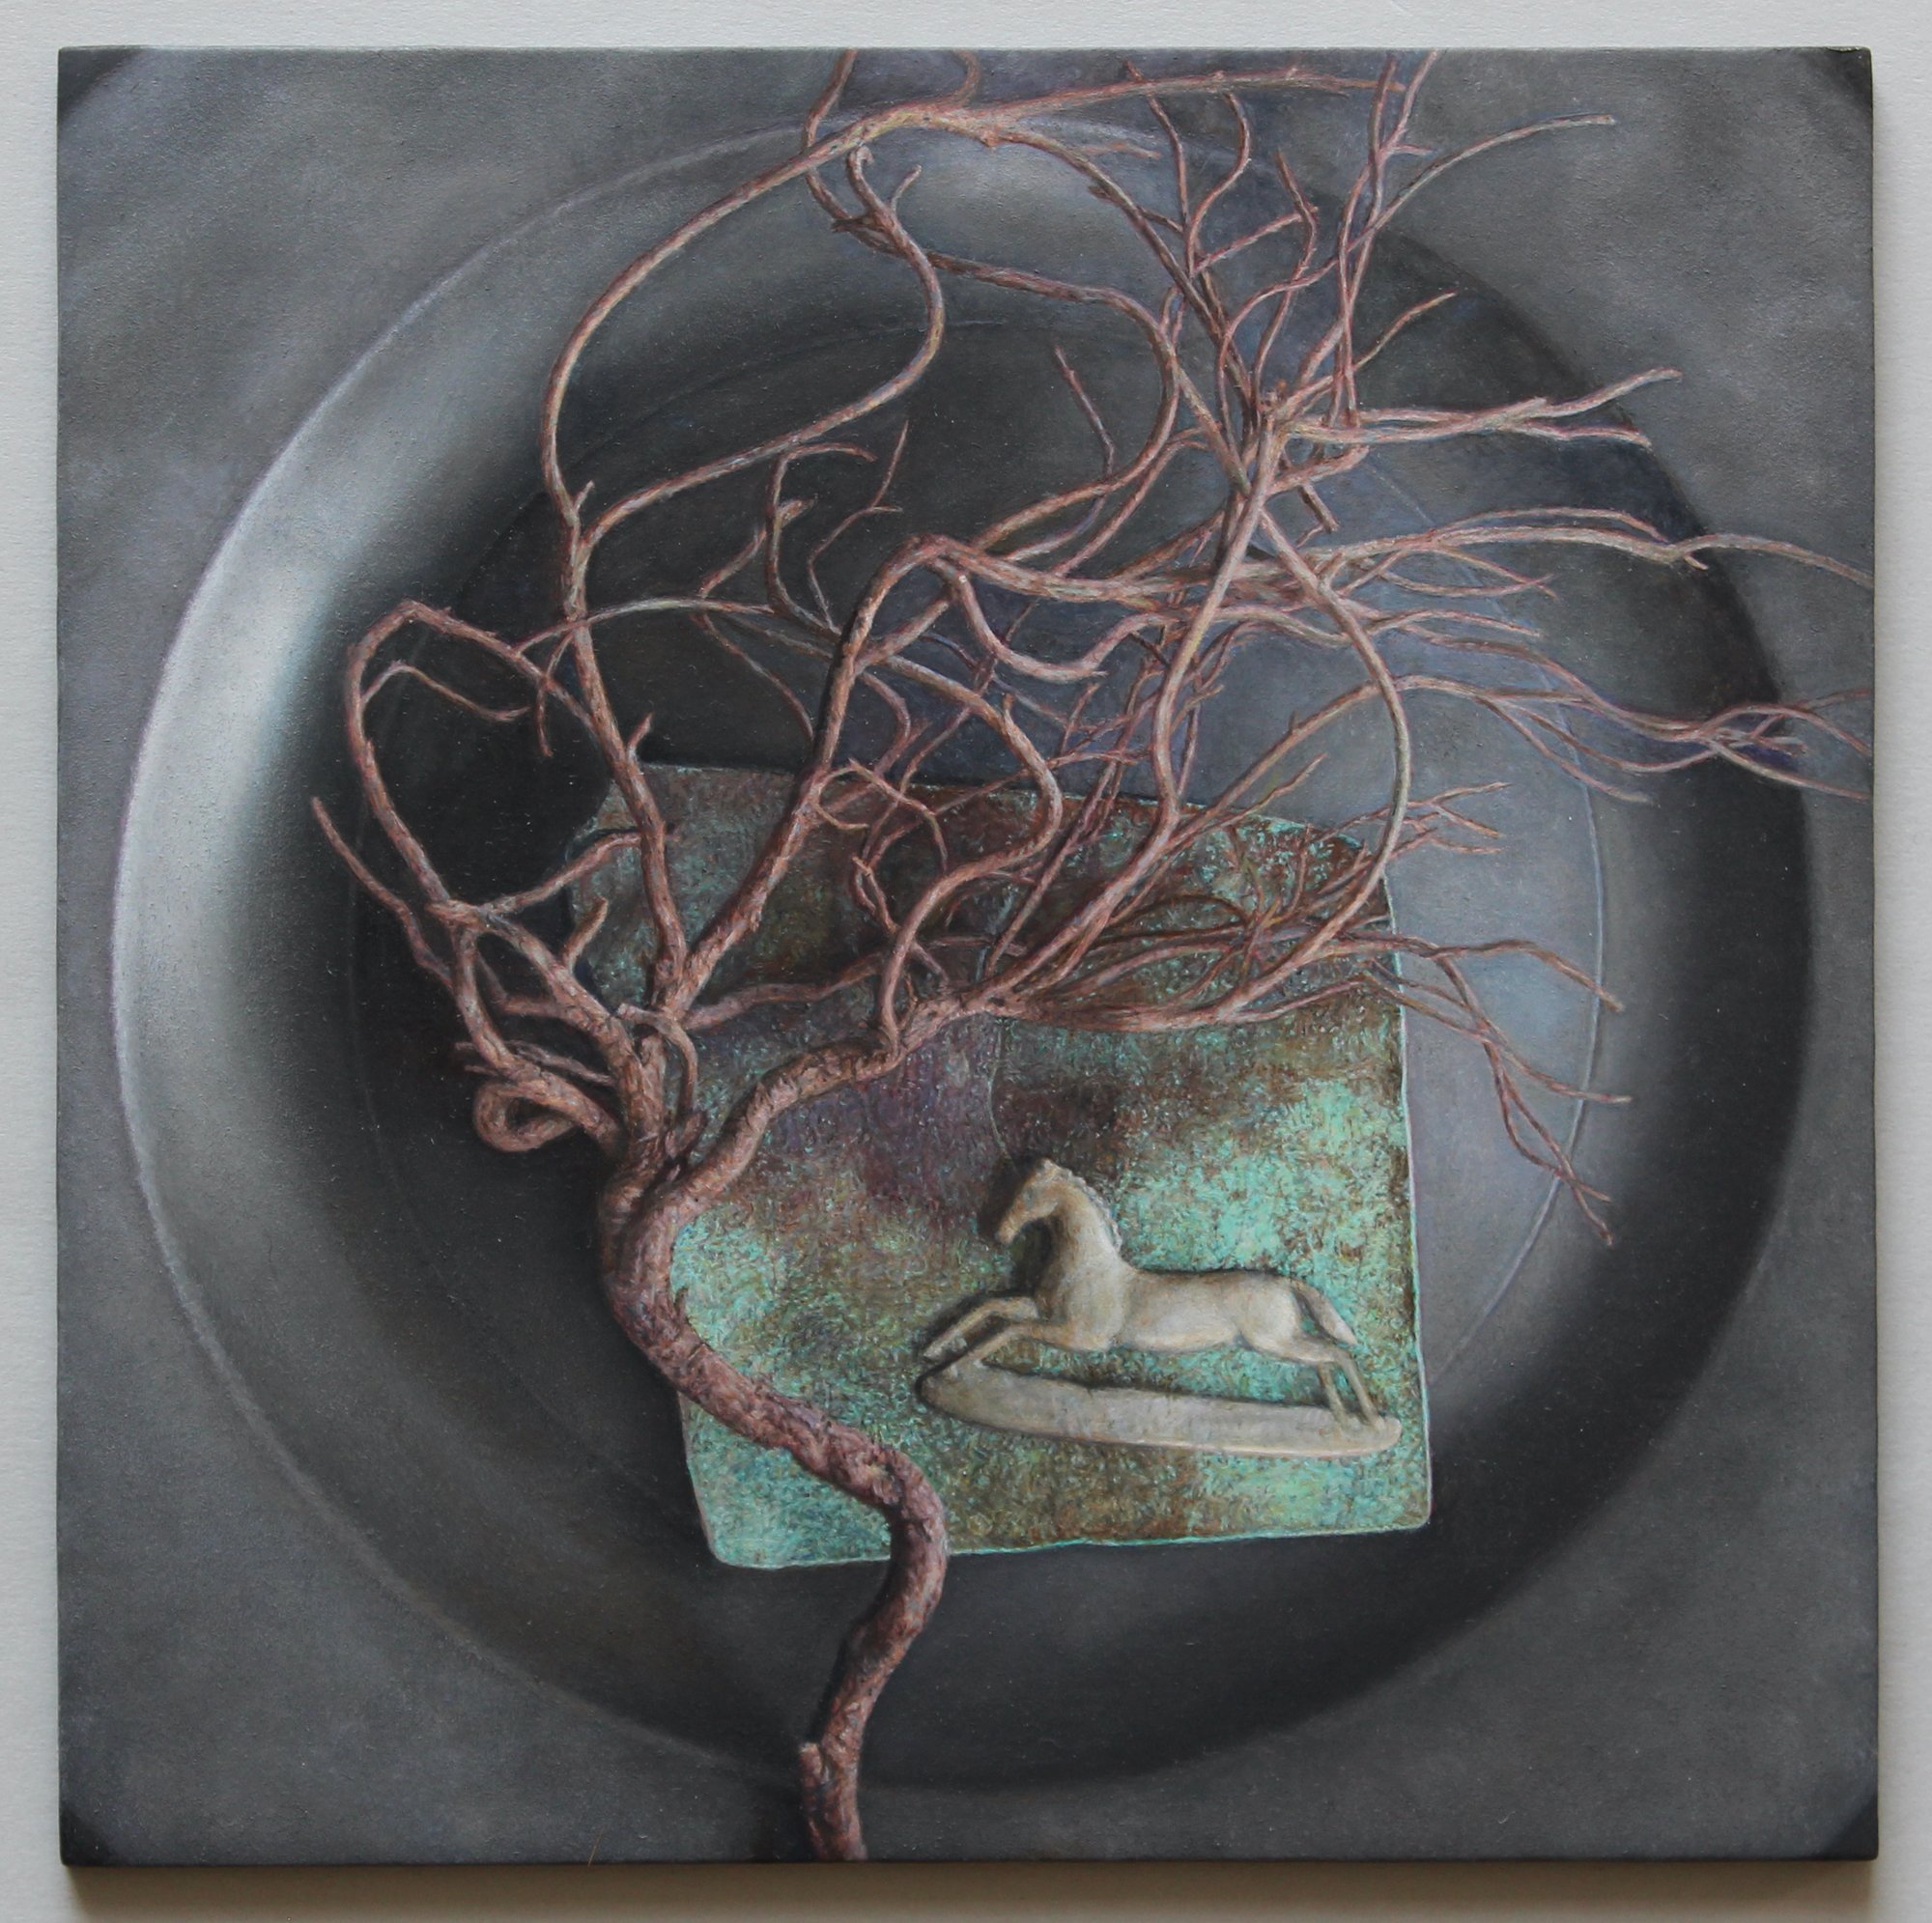 Pewter Plate with Found Objects ( Horse and Branch ), 2020, oil on board, 5 1/2 x 5 inches 